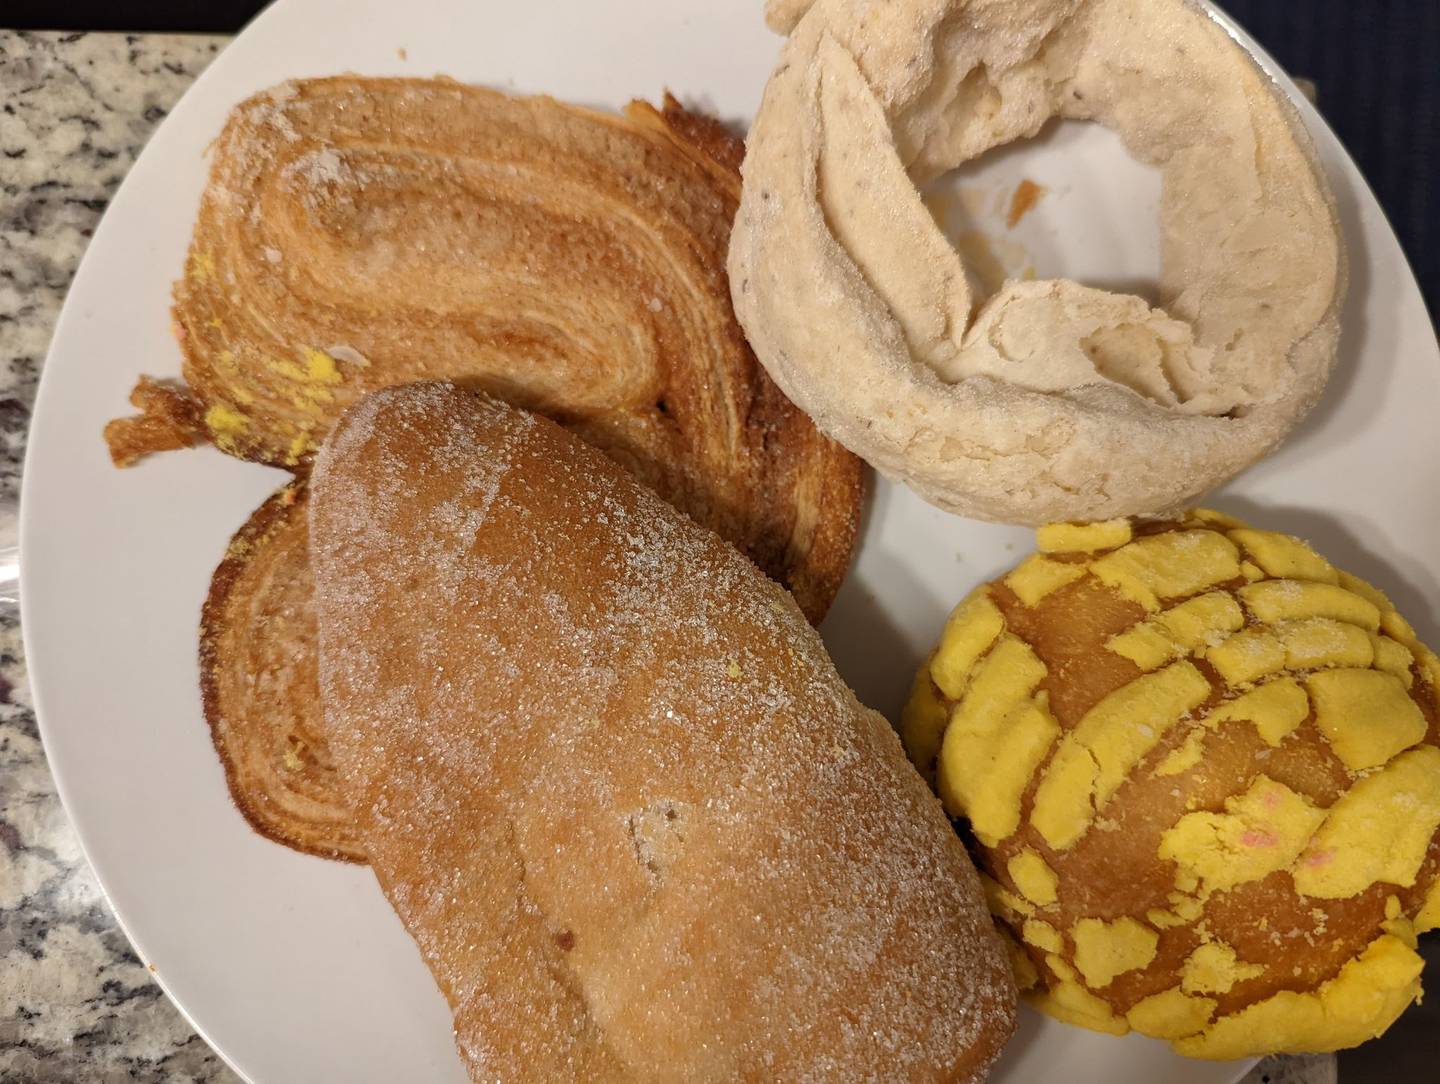 La Chicanita Bakery in Crest Hill offers a wide variety of homemade breads and pastries, juices, sandwiches and custom cakes. Pictured, clockwise, is a palmier, fried dough, concha and a cream cheese-filled danish.